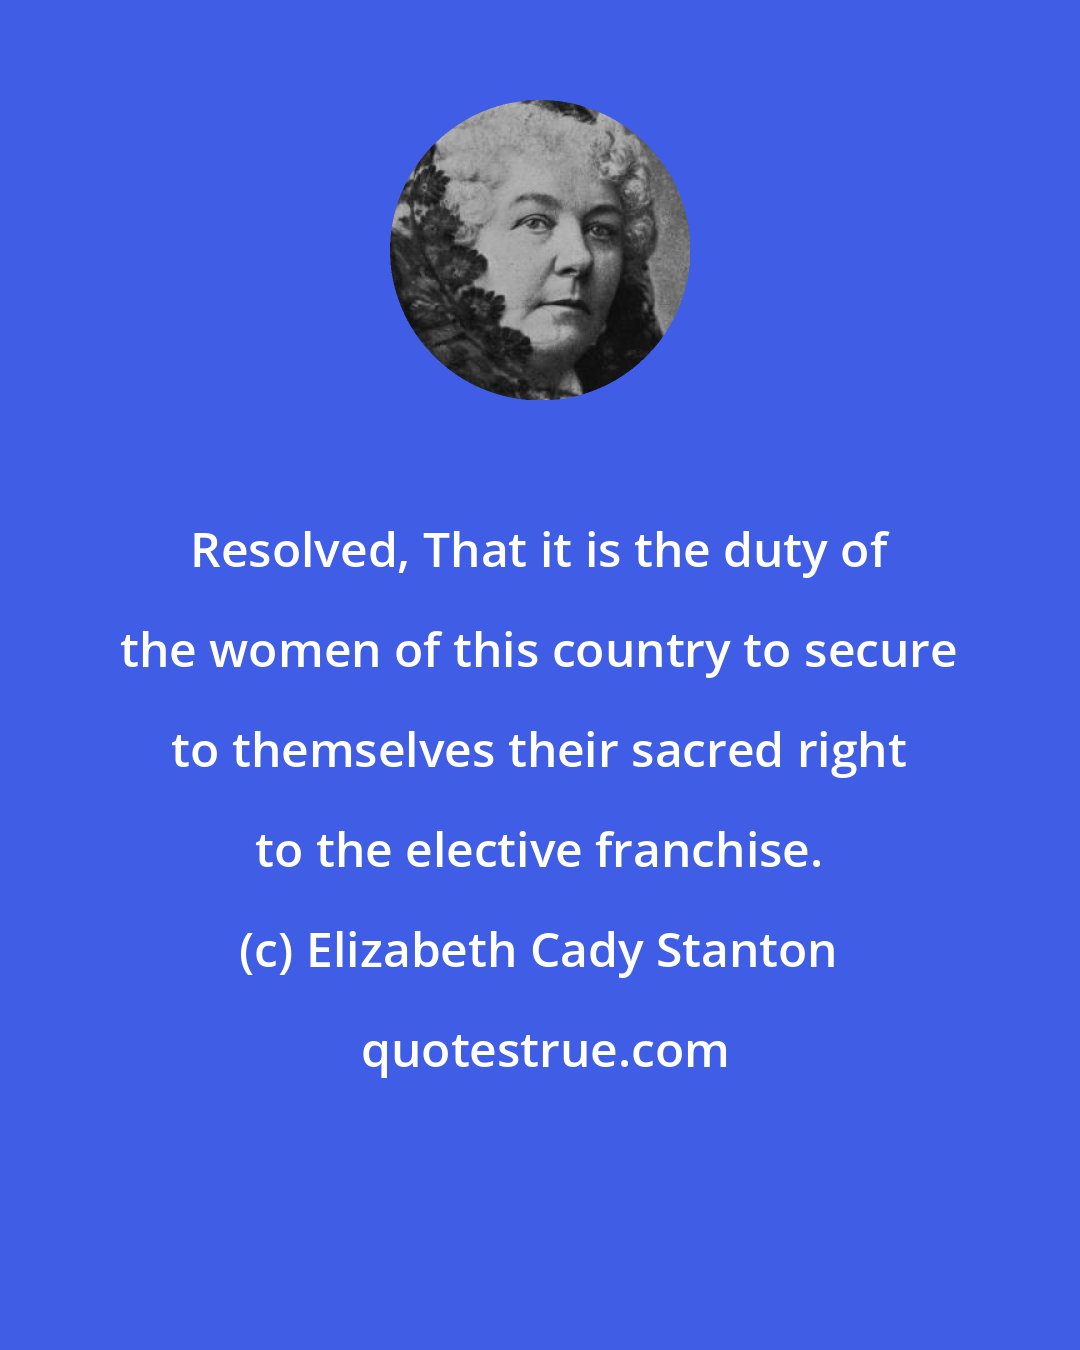 Elizabeth Cady Stanton: Resolved, That it is the duty of the women of this country to secure to themselves their sacred right to the elective franchise.